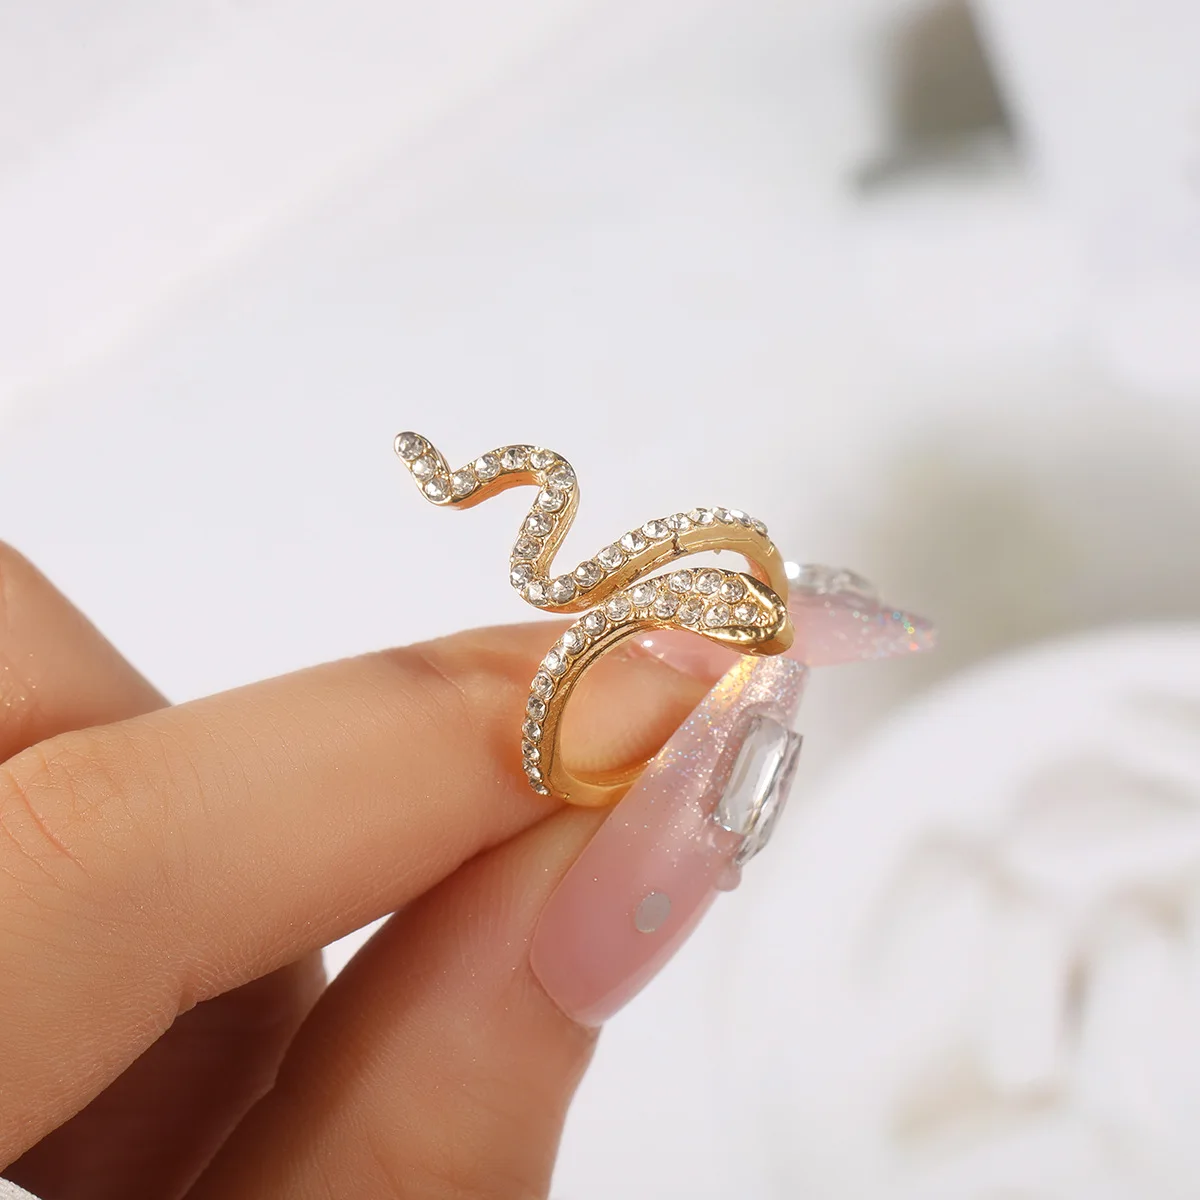 

Hot Selling Micro Inlaid Zircon Winding Simulated Snakes Ring Female Niche Design Fashion Personalized Index Finger Ring